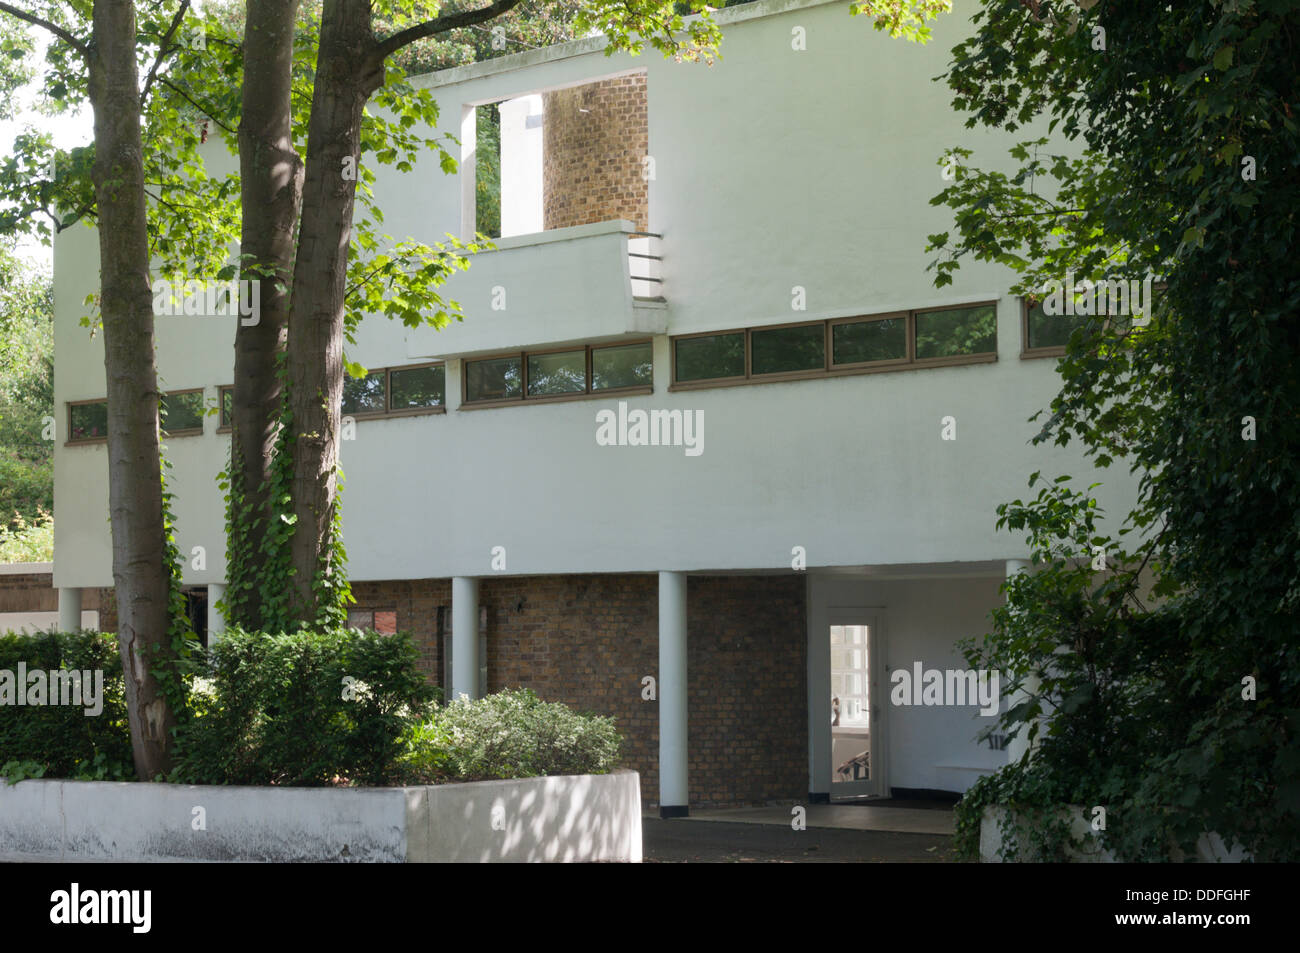 Six Pillars, a modernist house in South London, designed by the Berthold Lubetkin Tecton architectural practice in 1932. Stock Photo